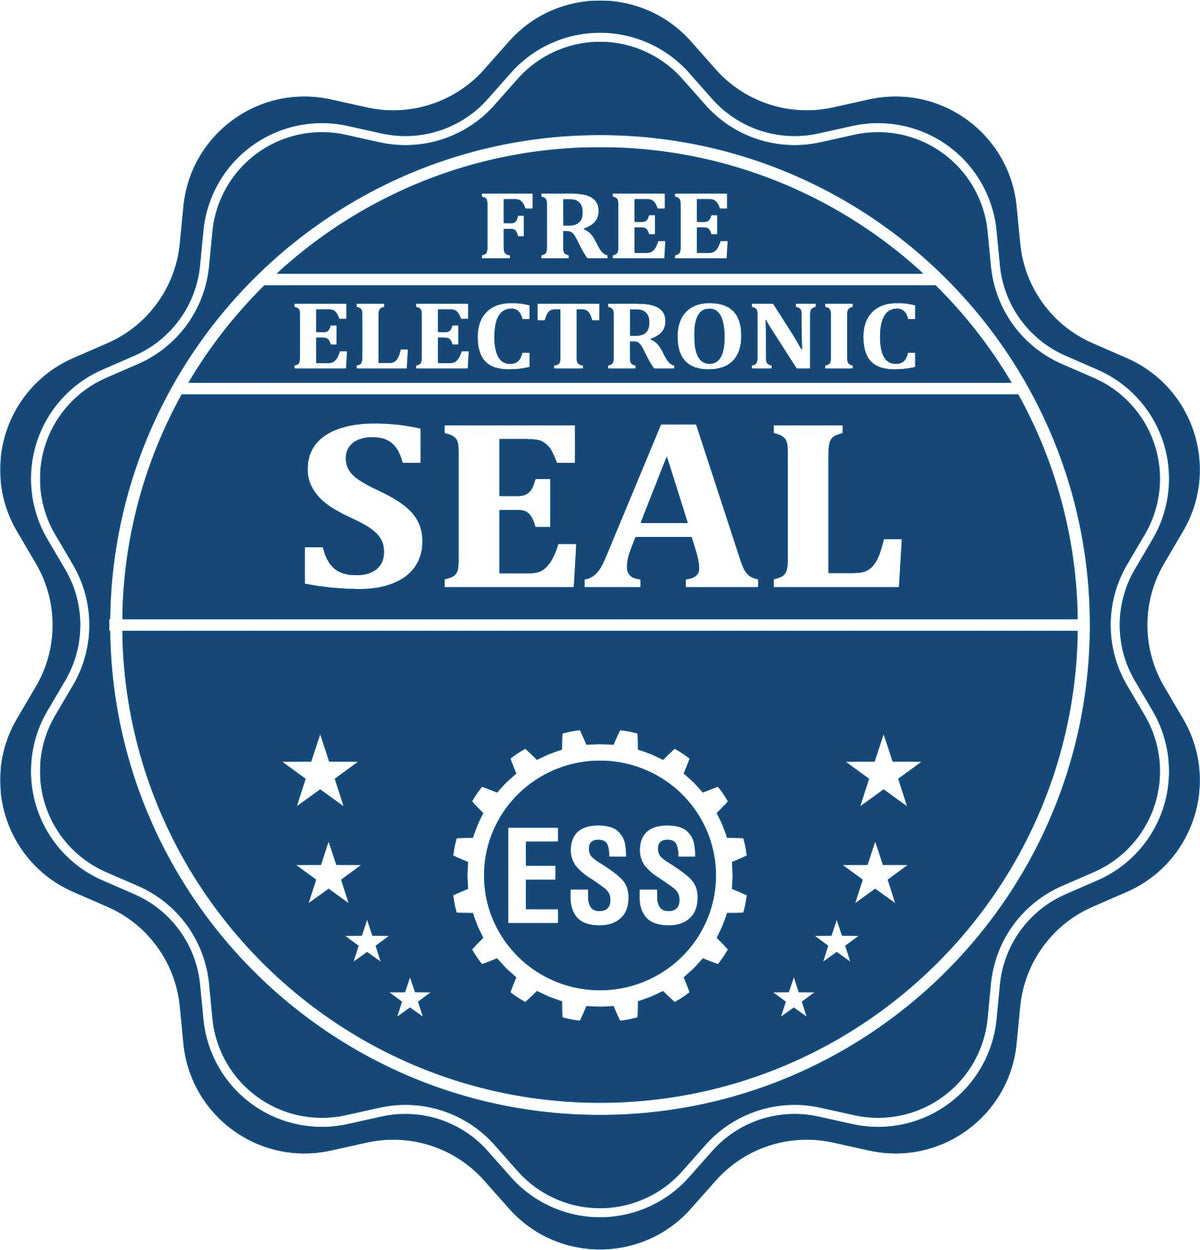 A badge showing a free electronic seal for the Soft Maryland Professional Engineer Seal with stars and the ESS gear on the emblem.